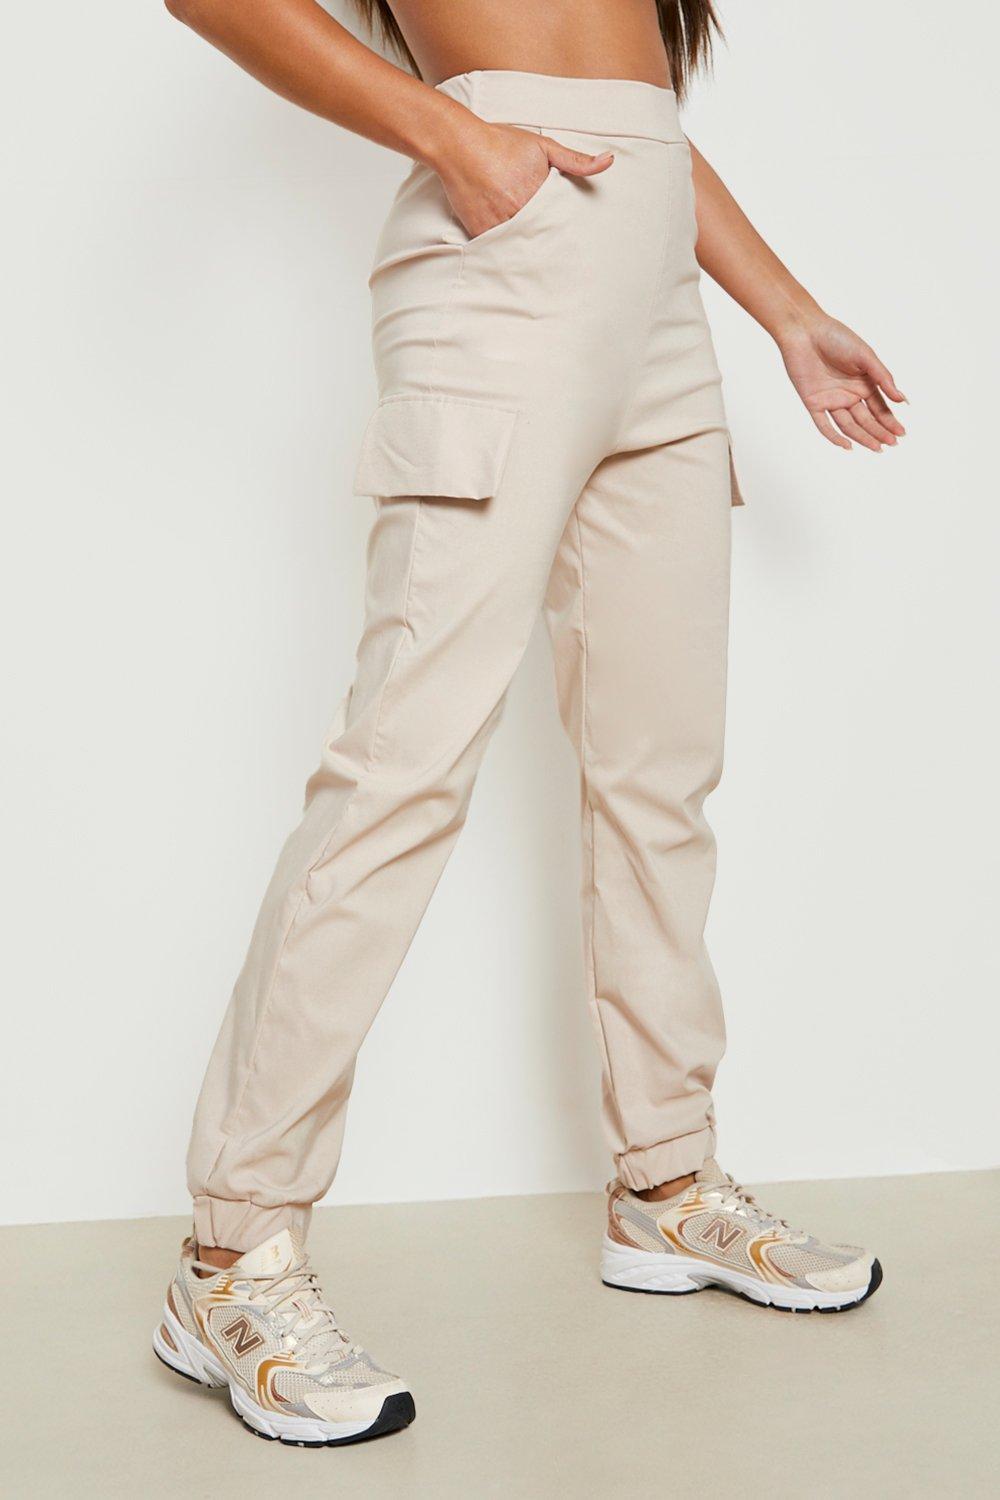 Tall Black Ruched Tie Ankle Skinny Cargo Pants